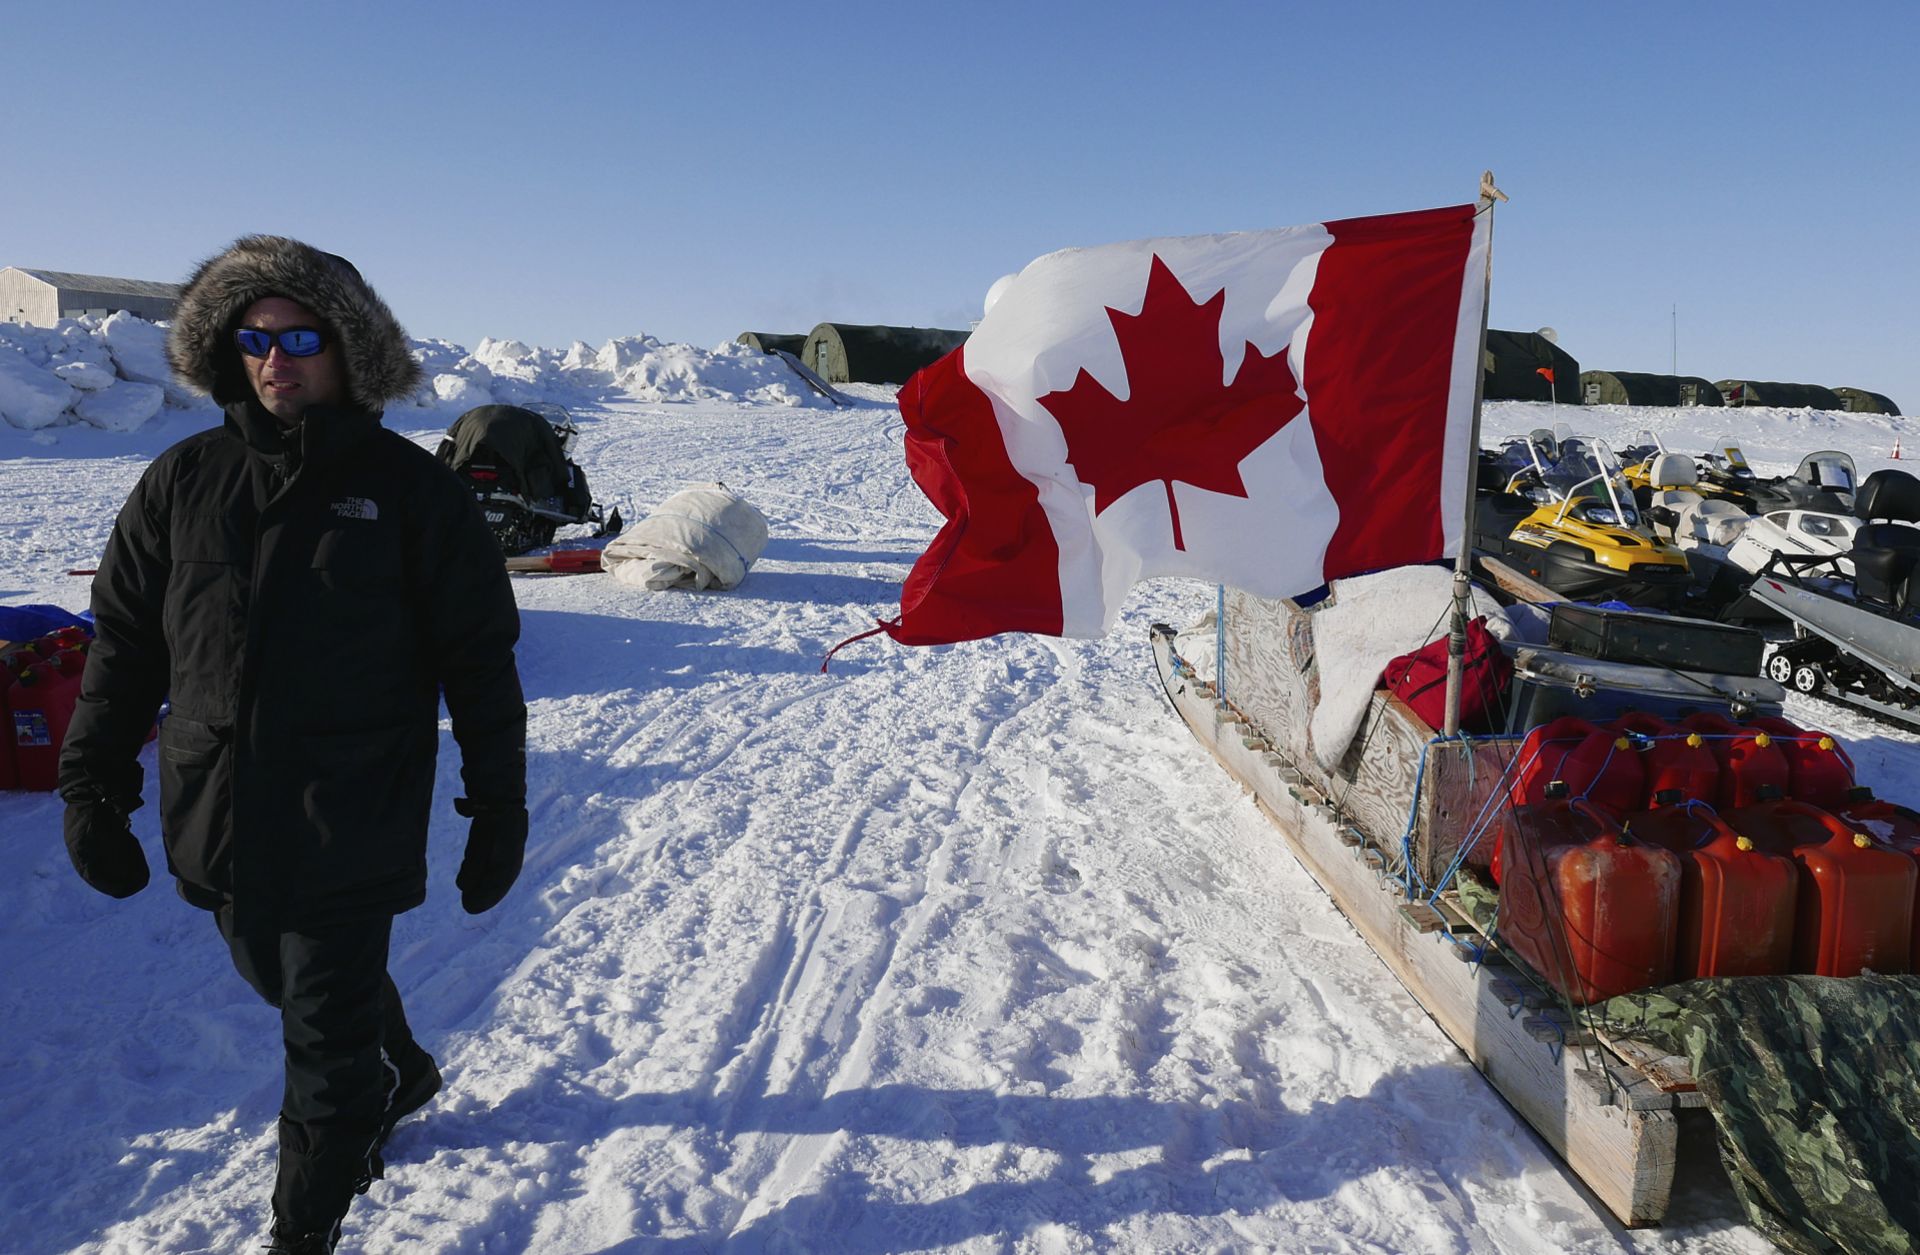 A project manager for the Arctic Research Foundation on April 9, 2015, walks past snowmobiles used by Canadian troops deployed to the territory of Nunavut to demonstrate Canadian sovereignty in the Arctic.